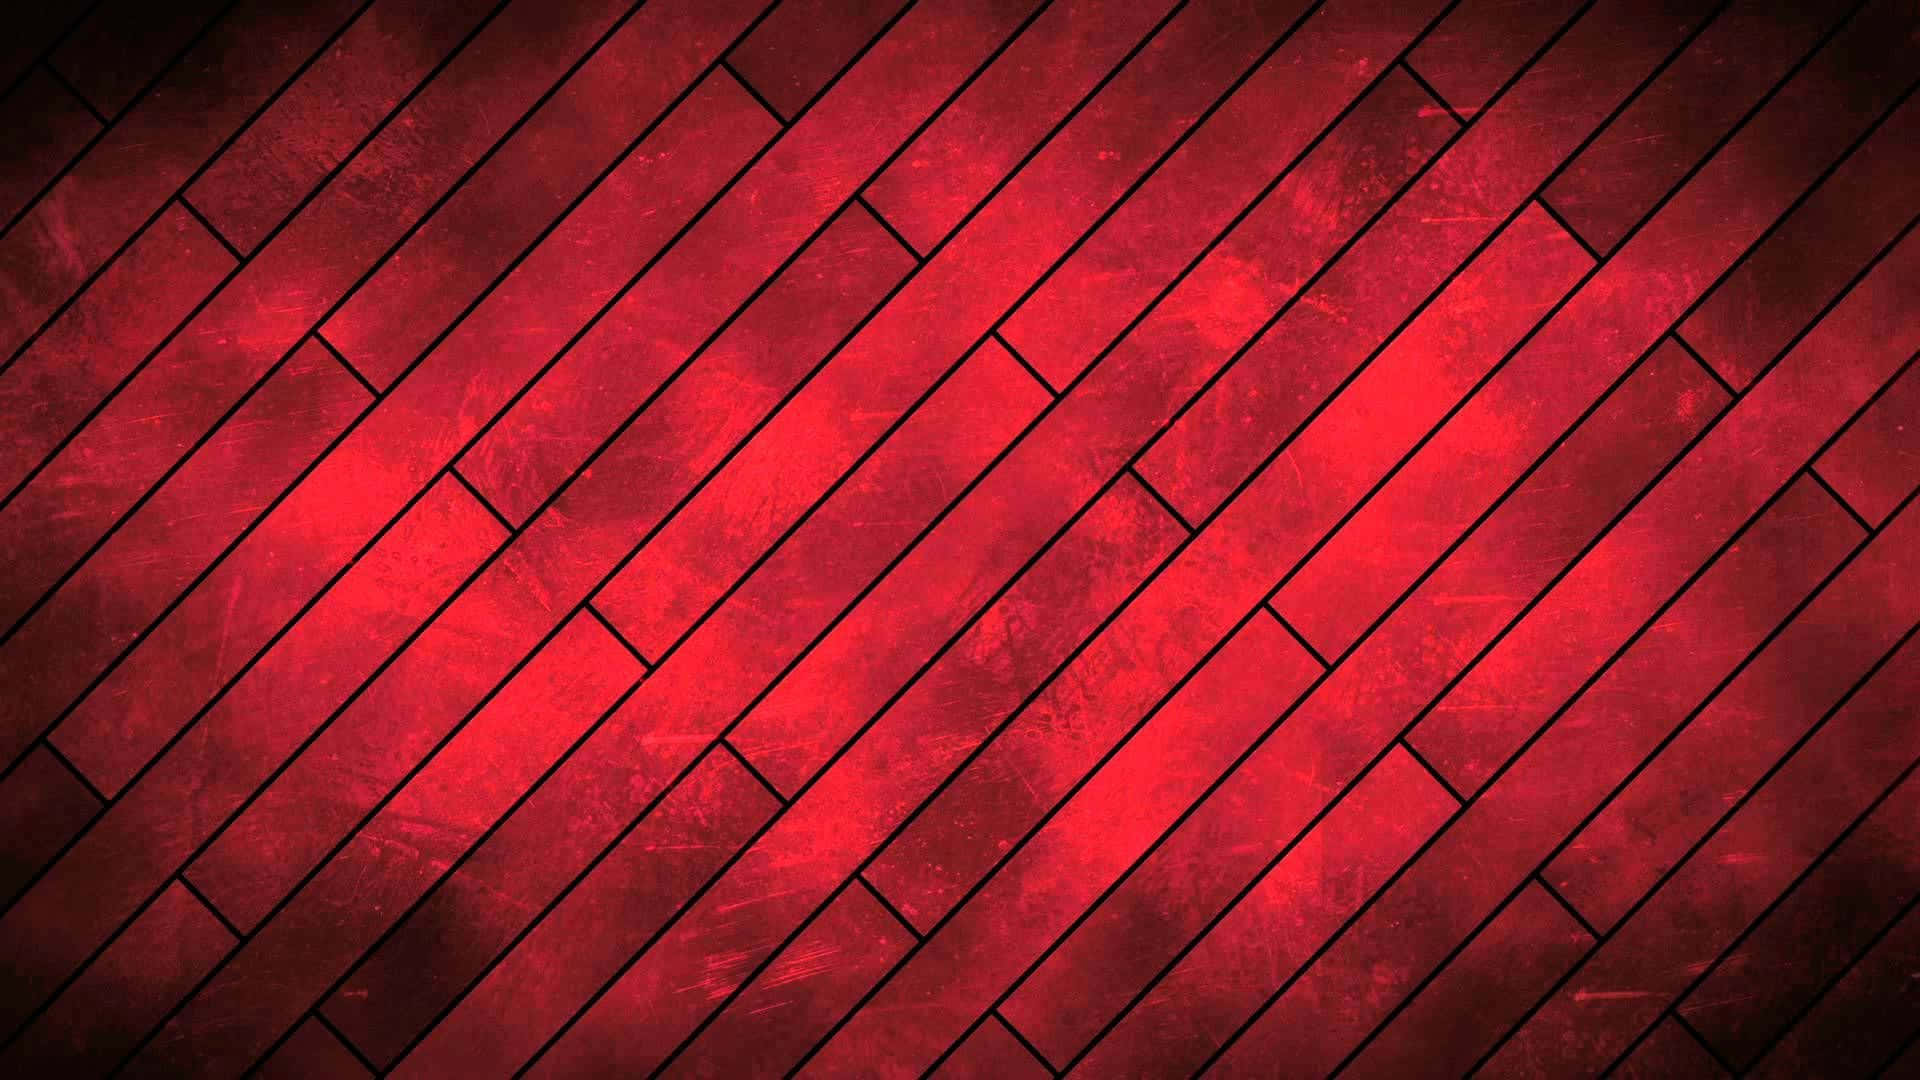 red youtube banner